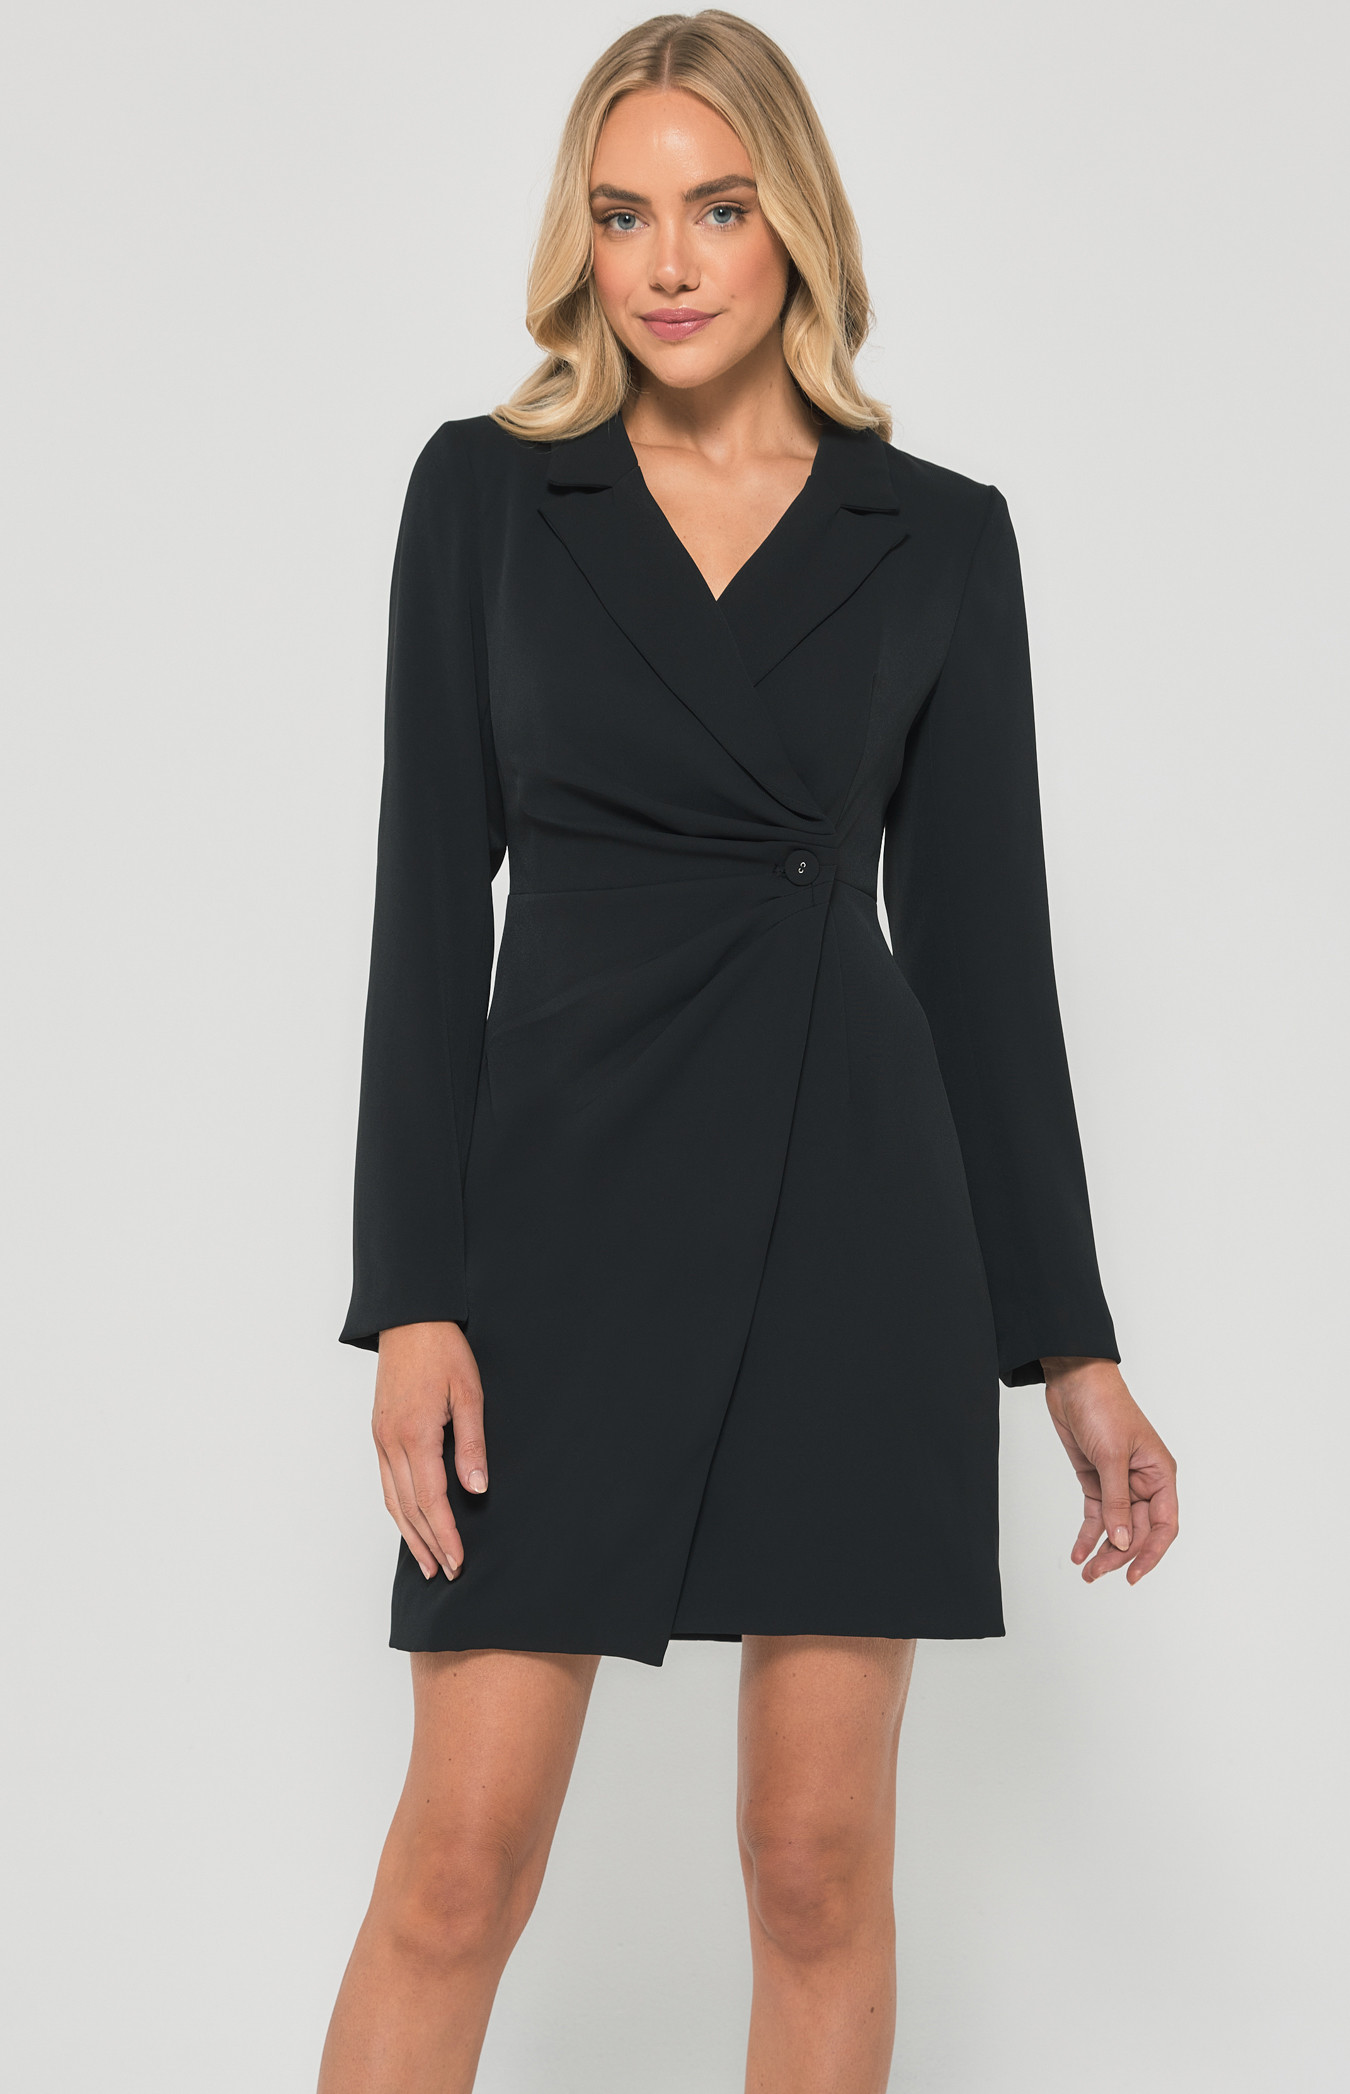 Blazer Dress with Pleated Front Details (SDR1365B)